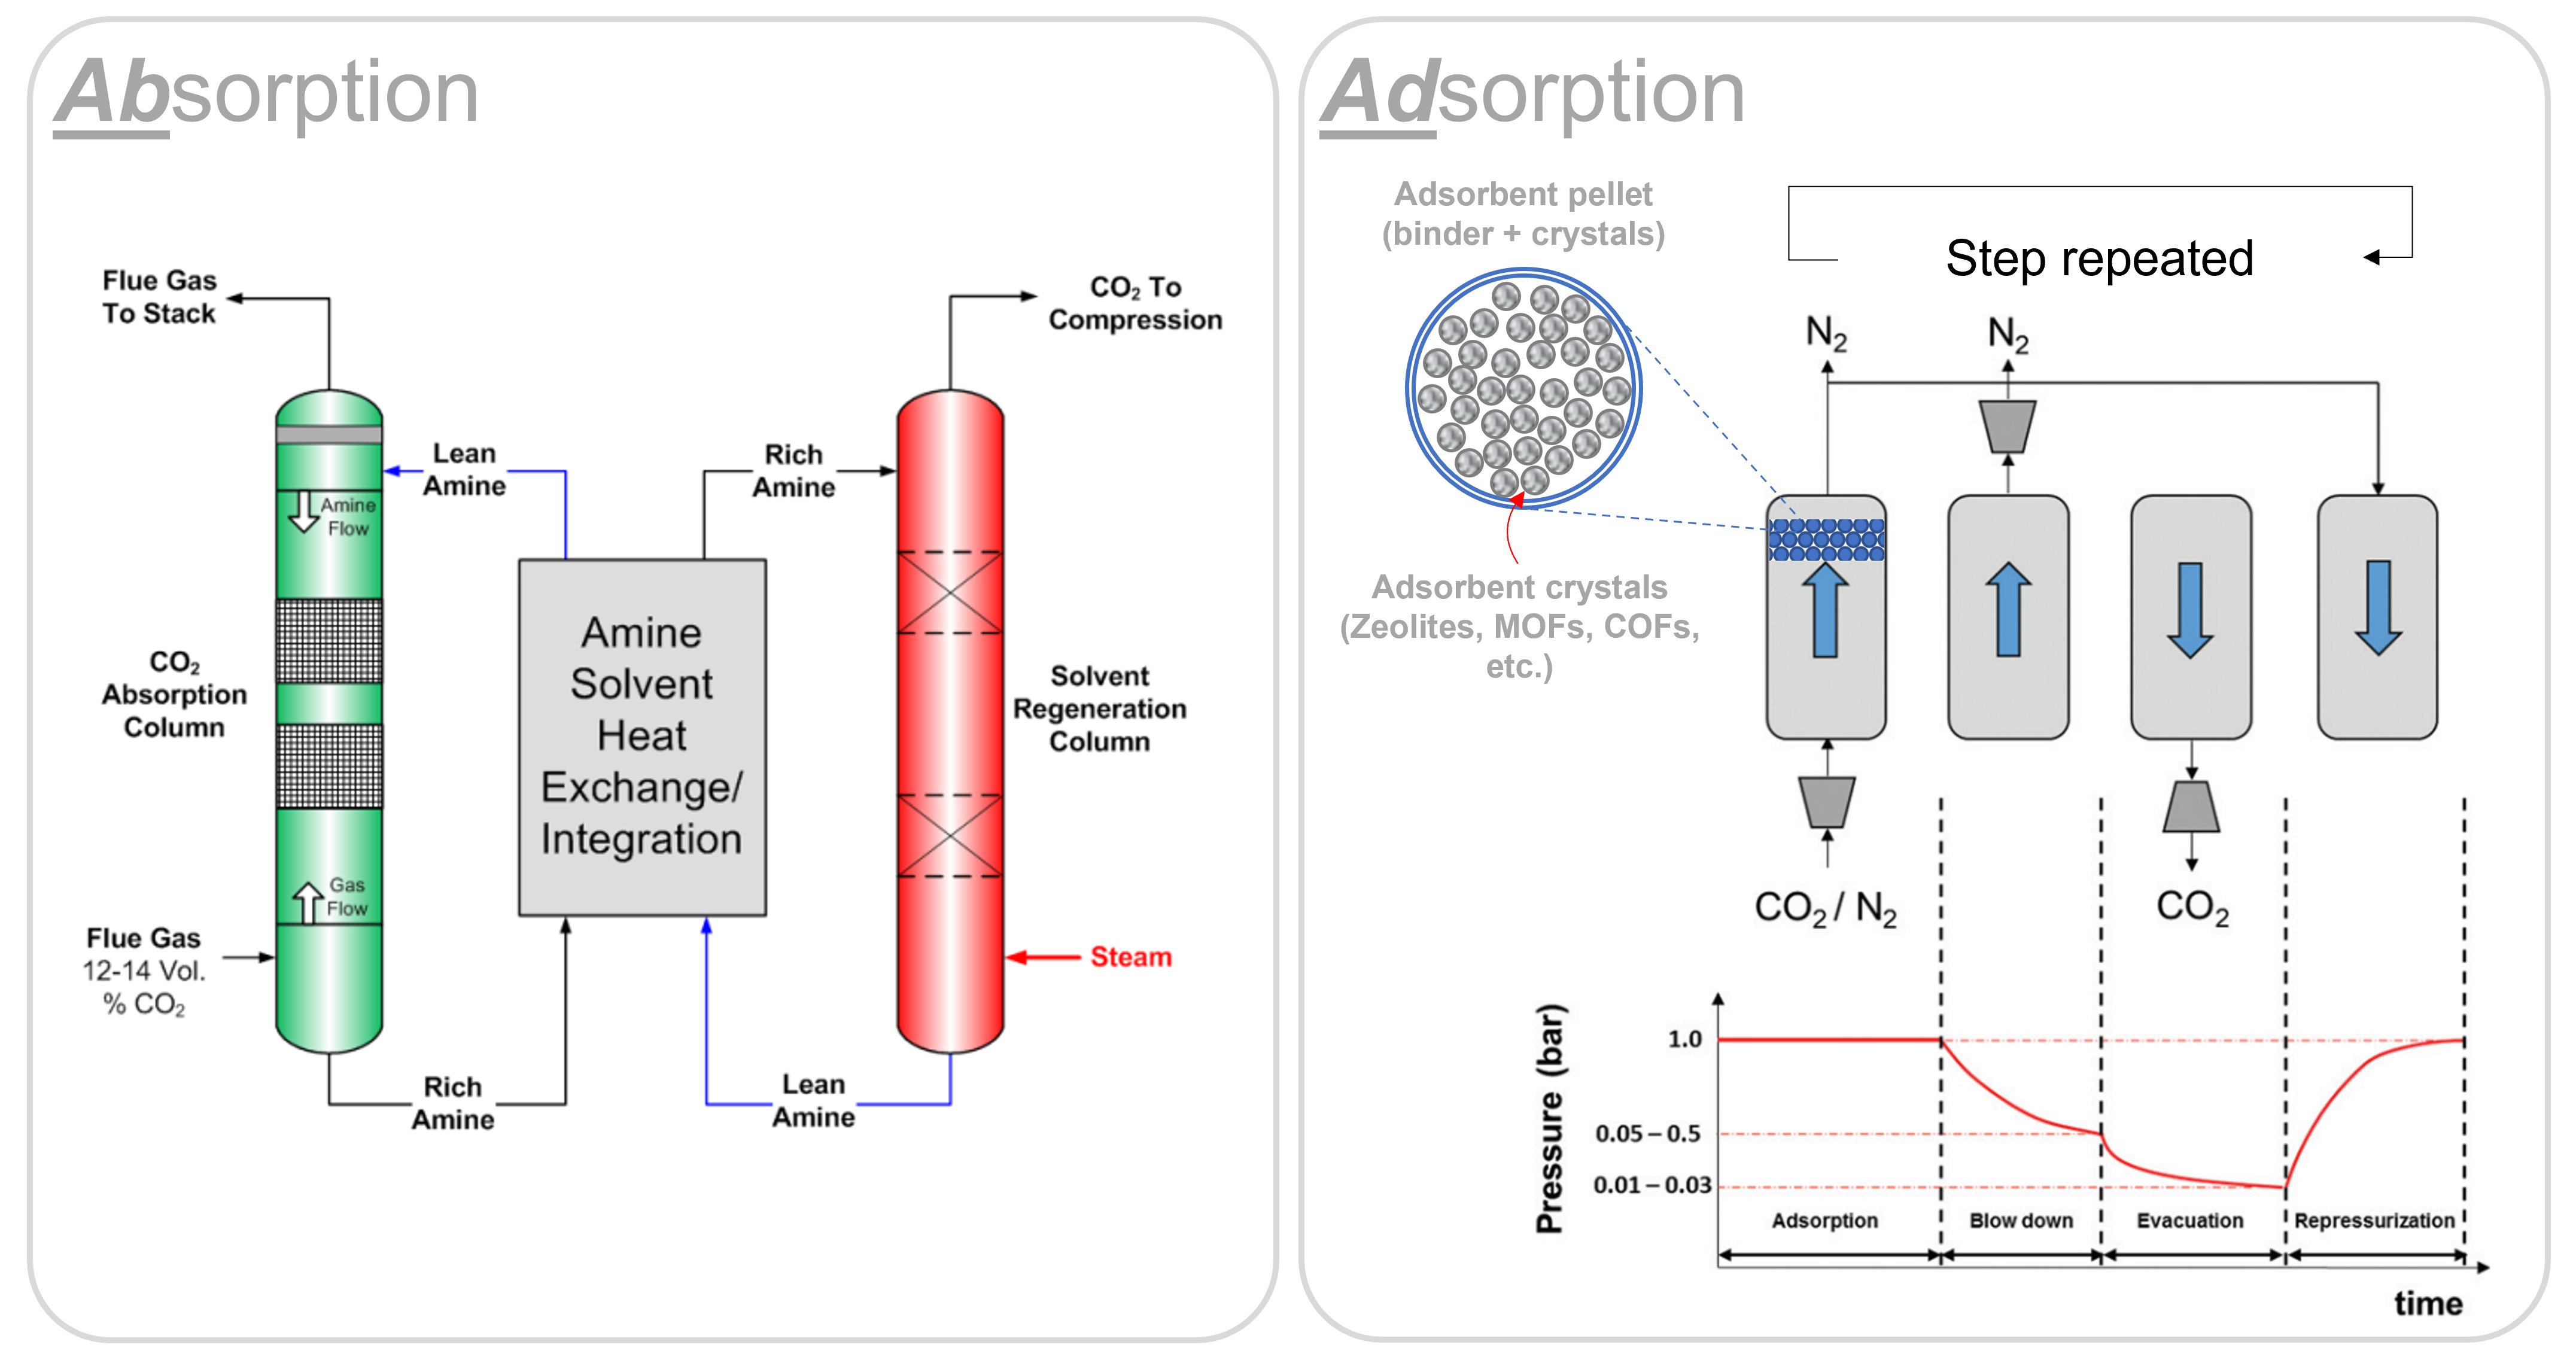 compare absorption process with adsorption process